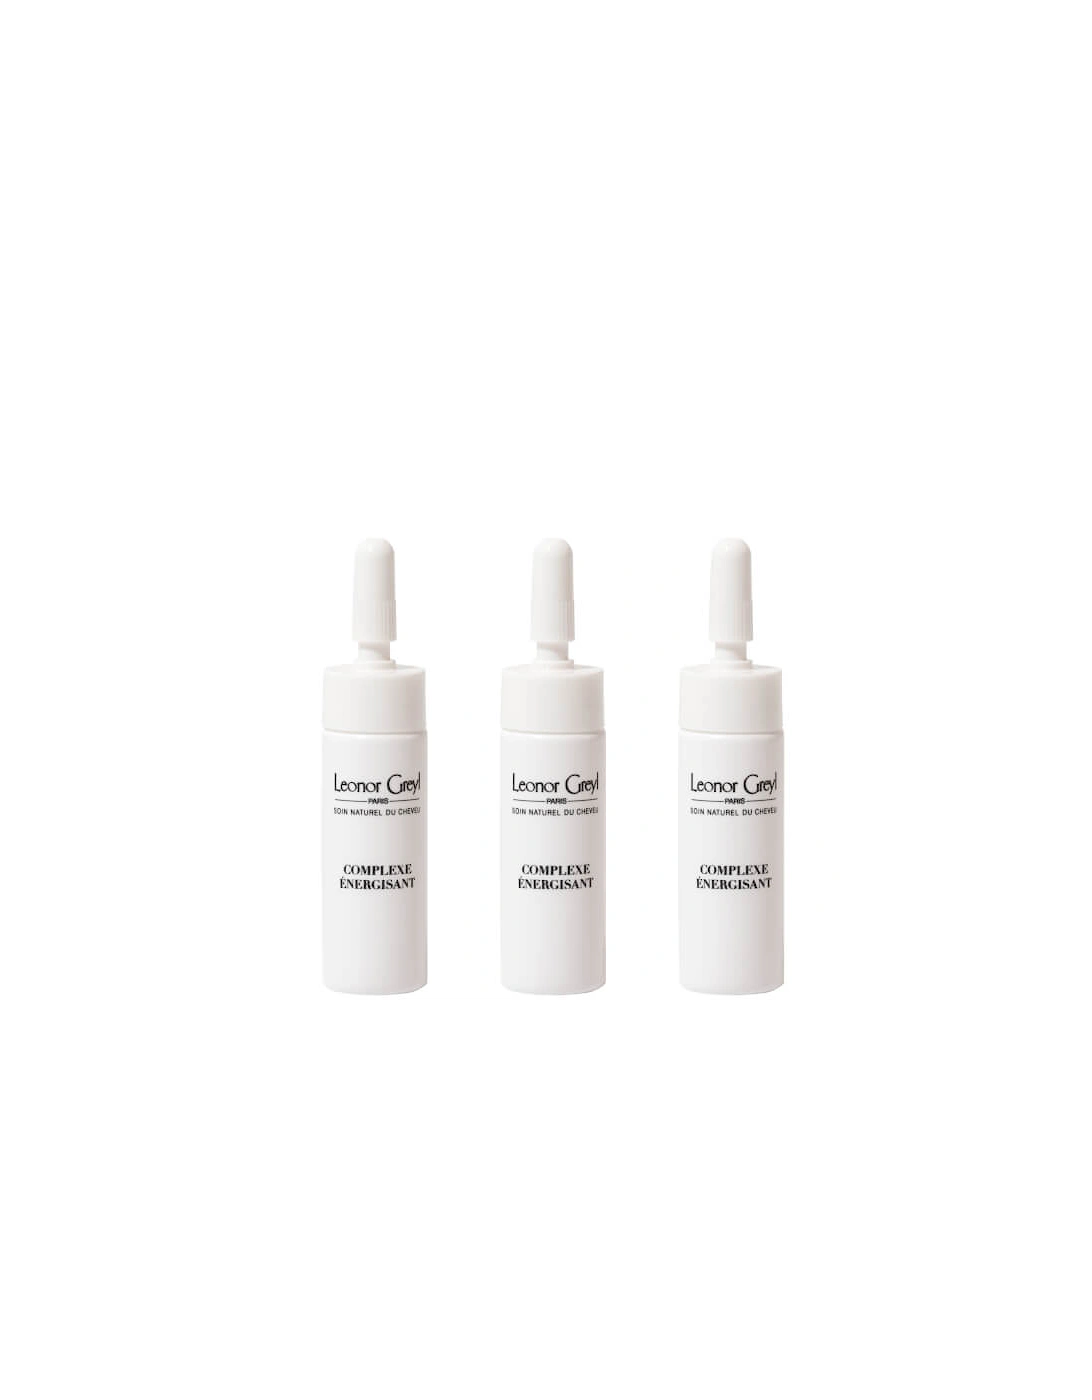 Complexe Energisant 12 Vials of 5ml (Hair Loss Treatment), 2 of 1